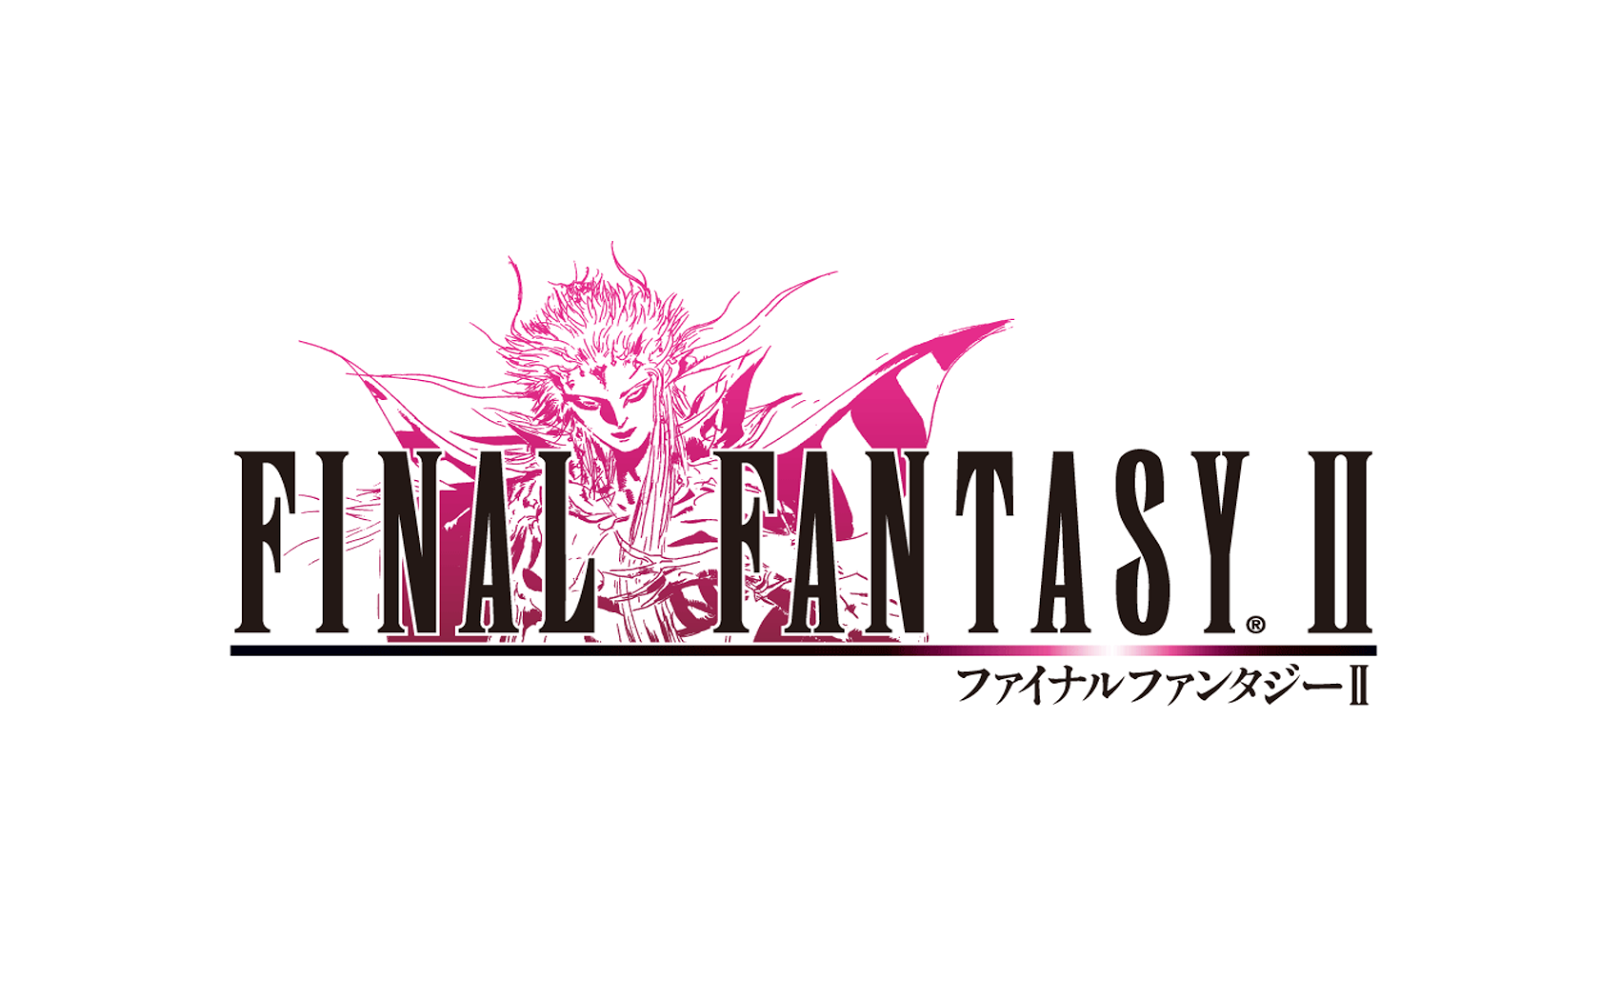 the logo  for final fantasy  2 classic final fantasy  ftw xd